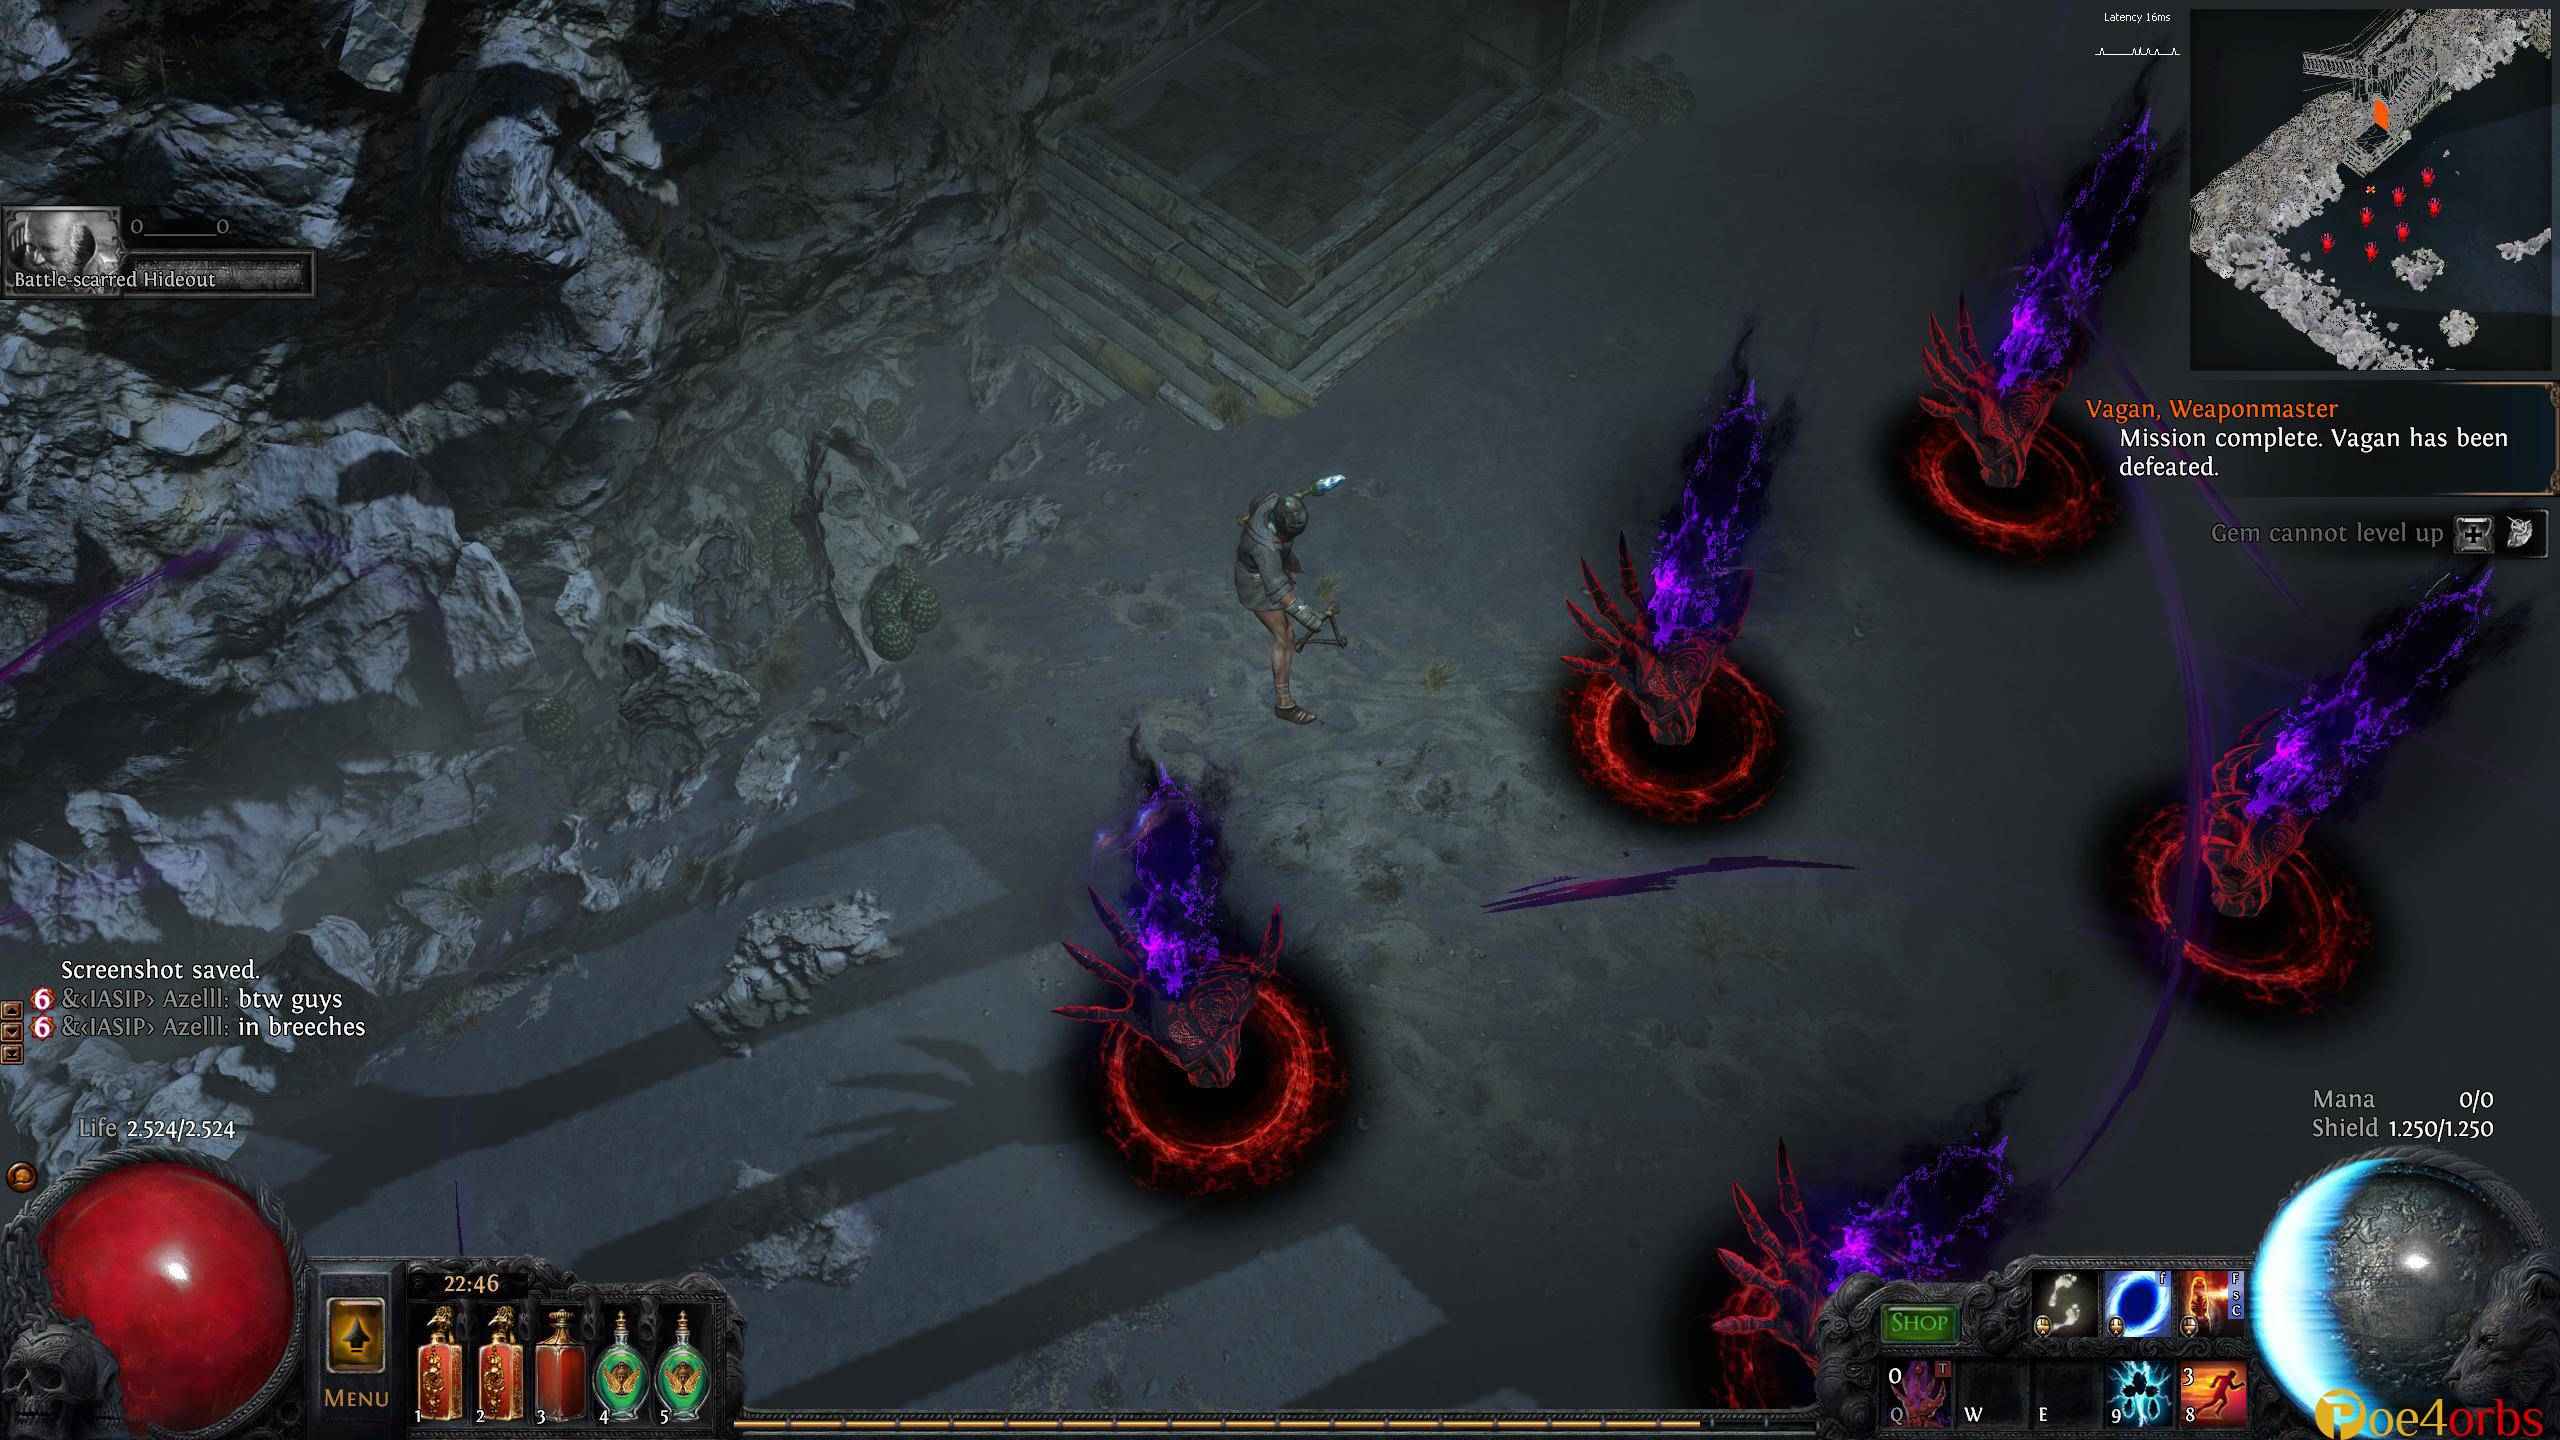 Shapers orbs are permanent like bandit rewards